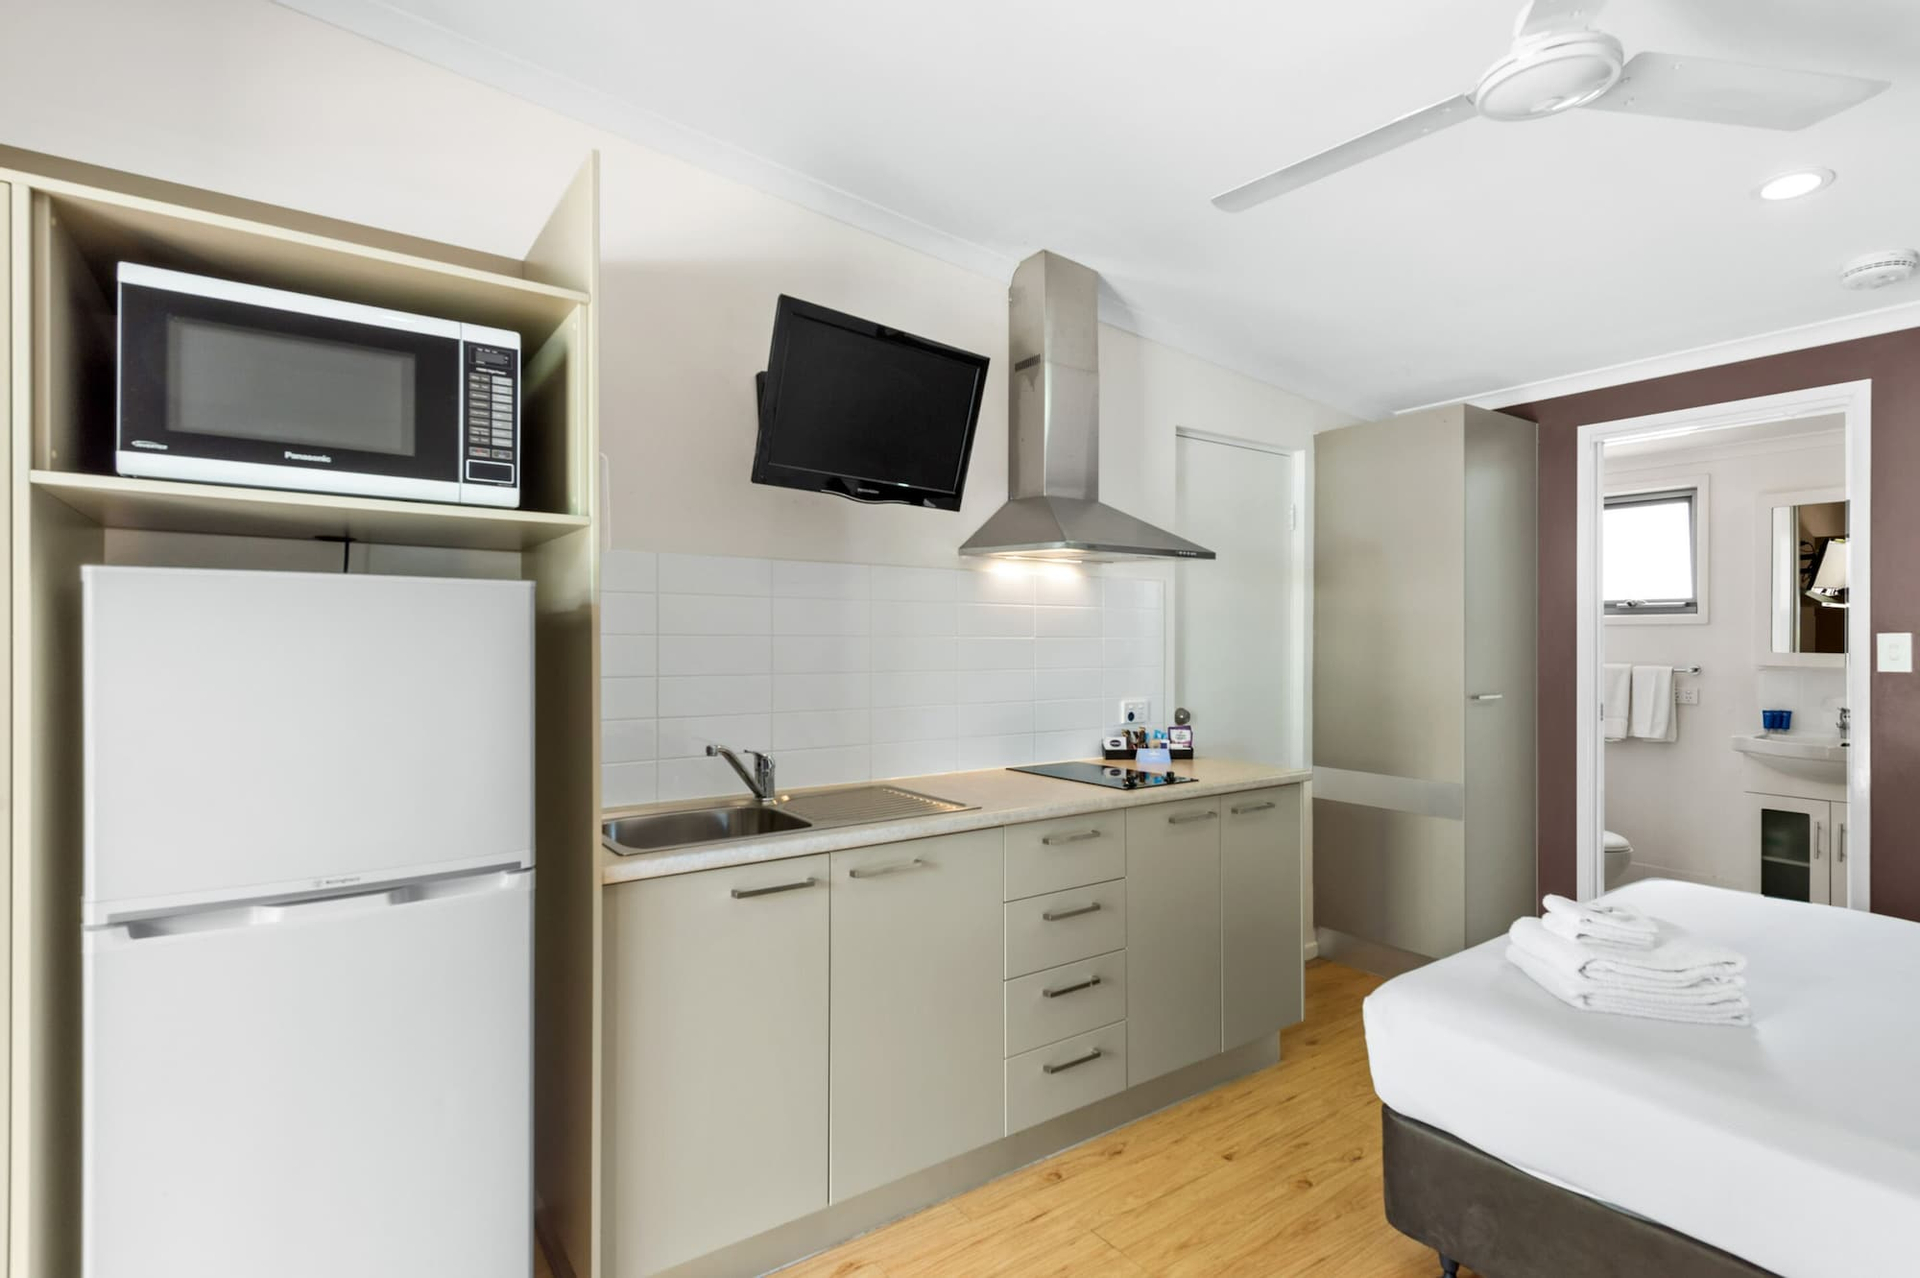 Private kitchen 4, Discovery Parks – Darwin, Winnellie